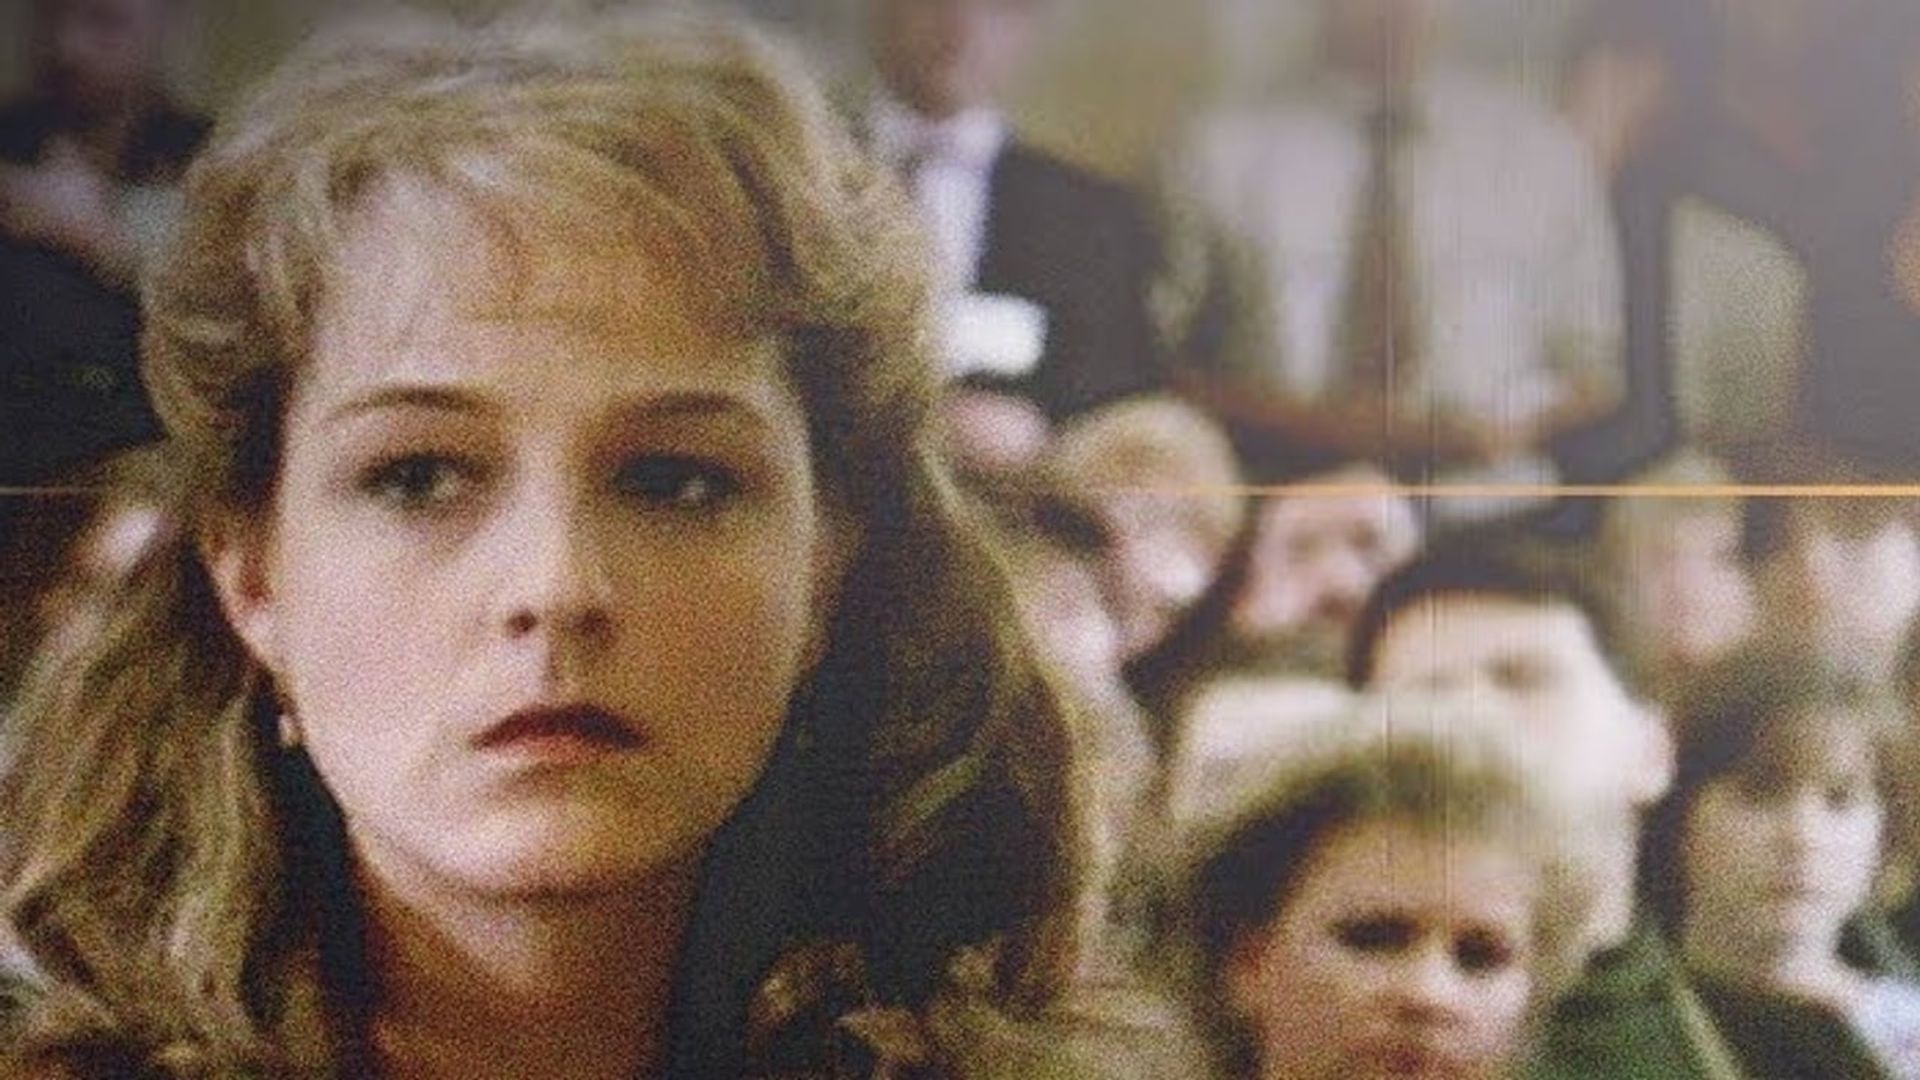 Murder in New Hampshire: The Pamela Smart Story background